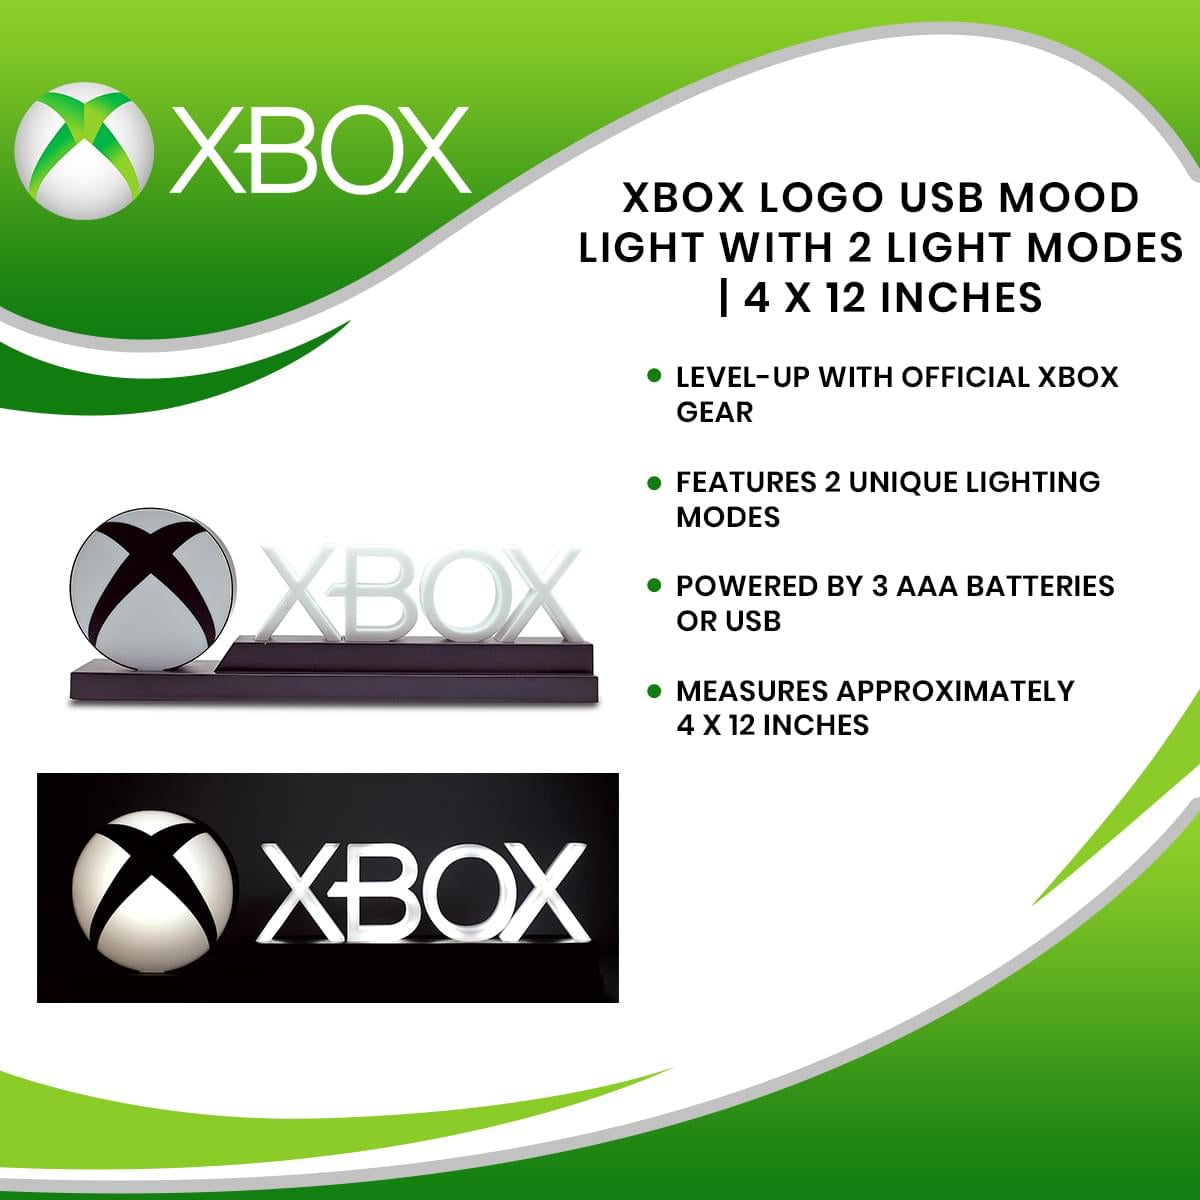 Xbox Logo USB Mood Light with 2 Light Modes | 4 x 12 Inches